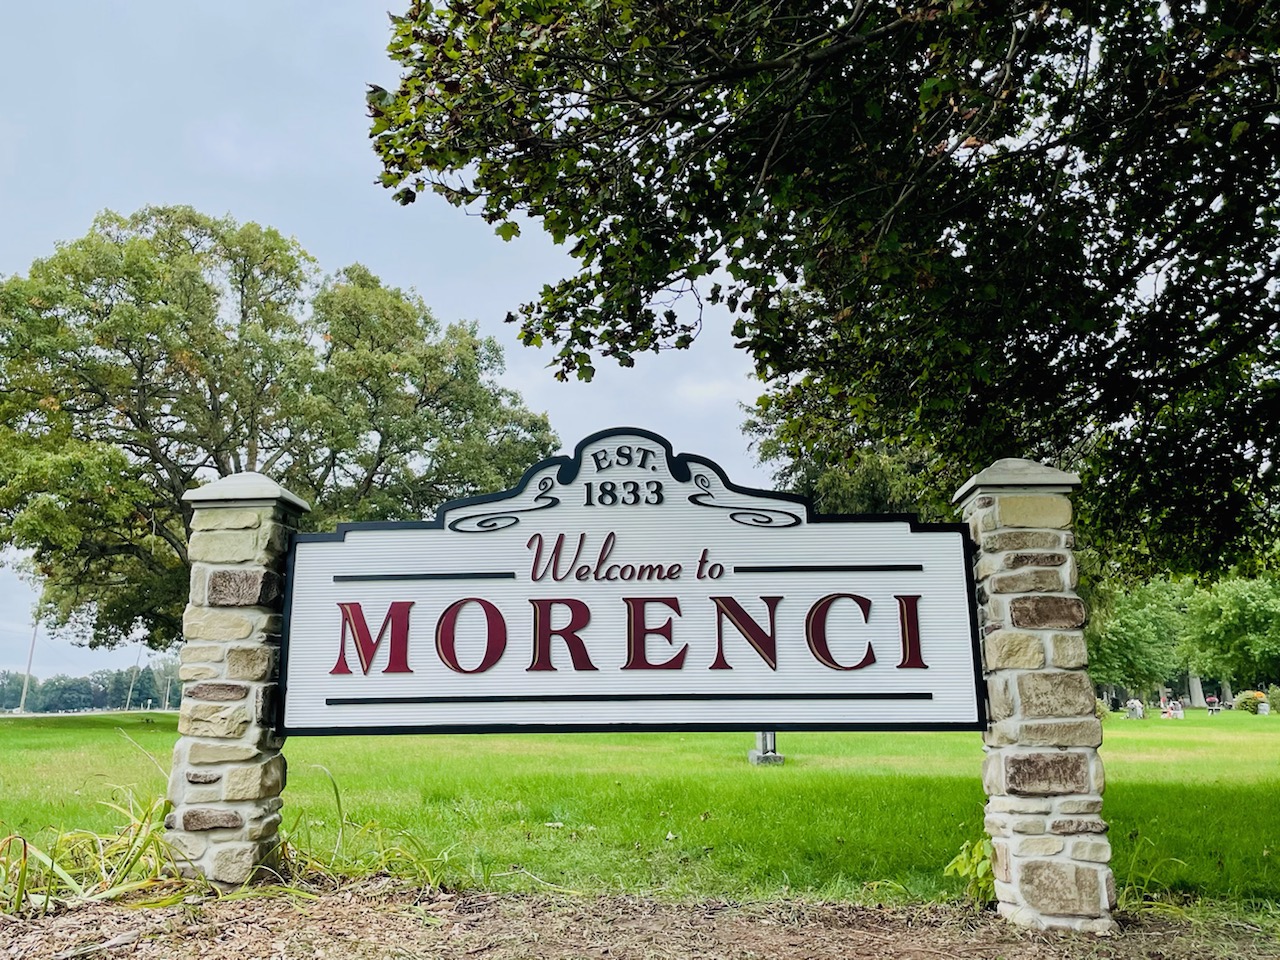 Welcome to Morenci! Your first step into Michigan.